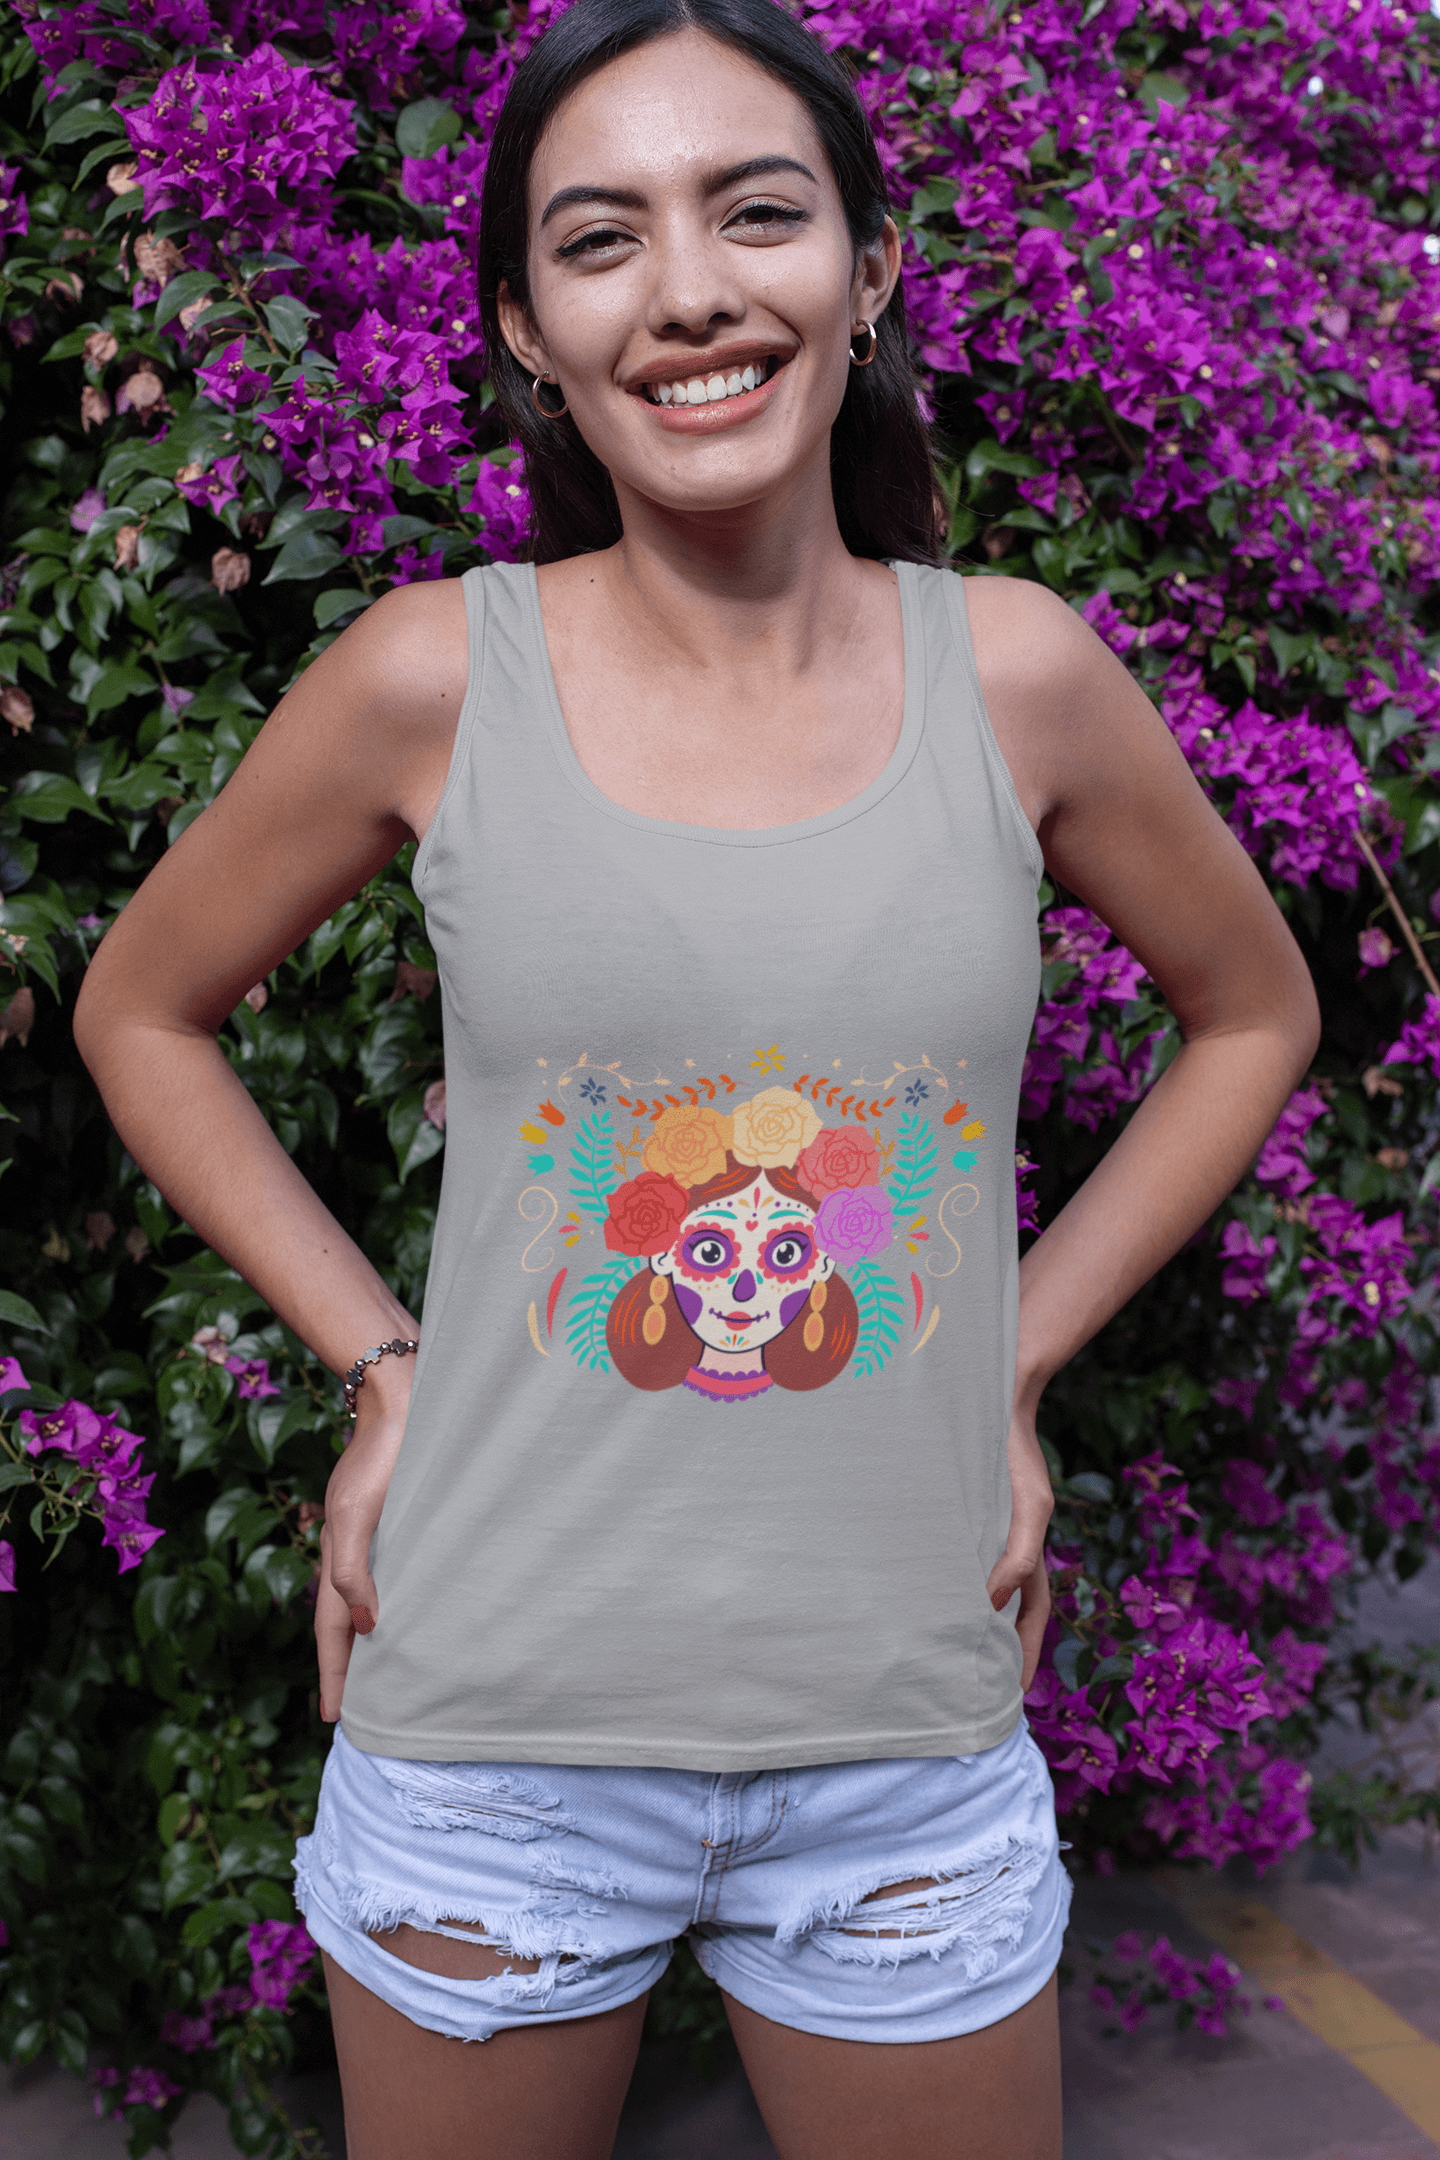 Mexican Skull Girl Tank Top - The Accessorys Official